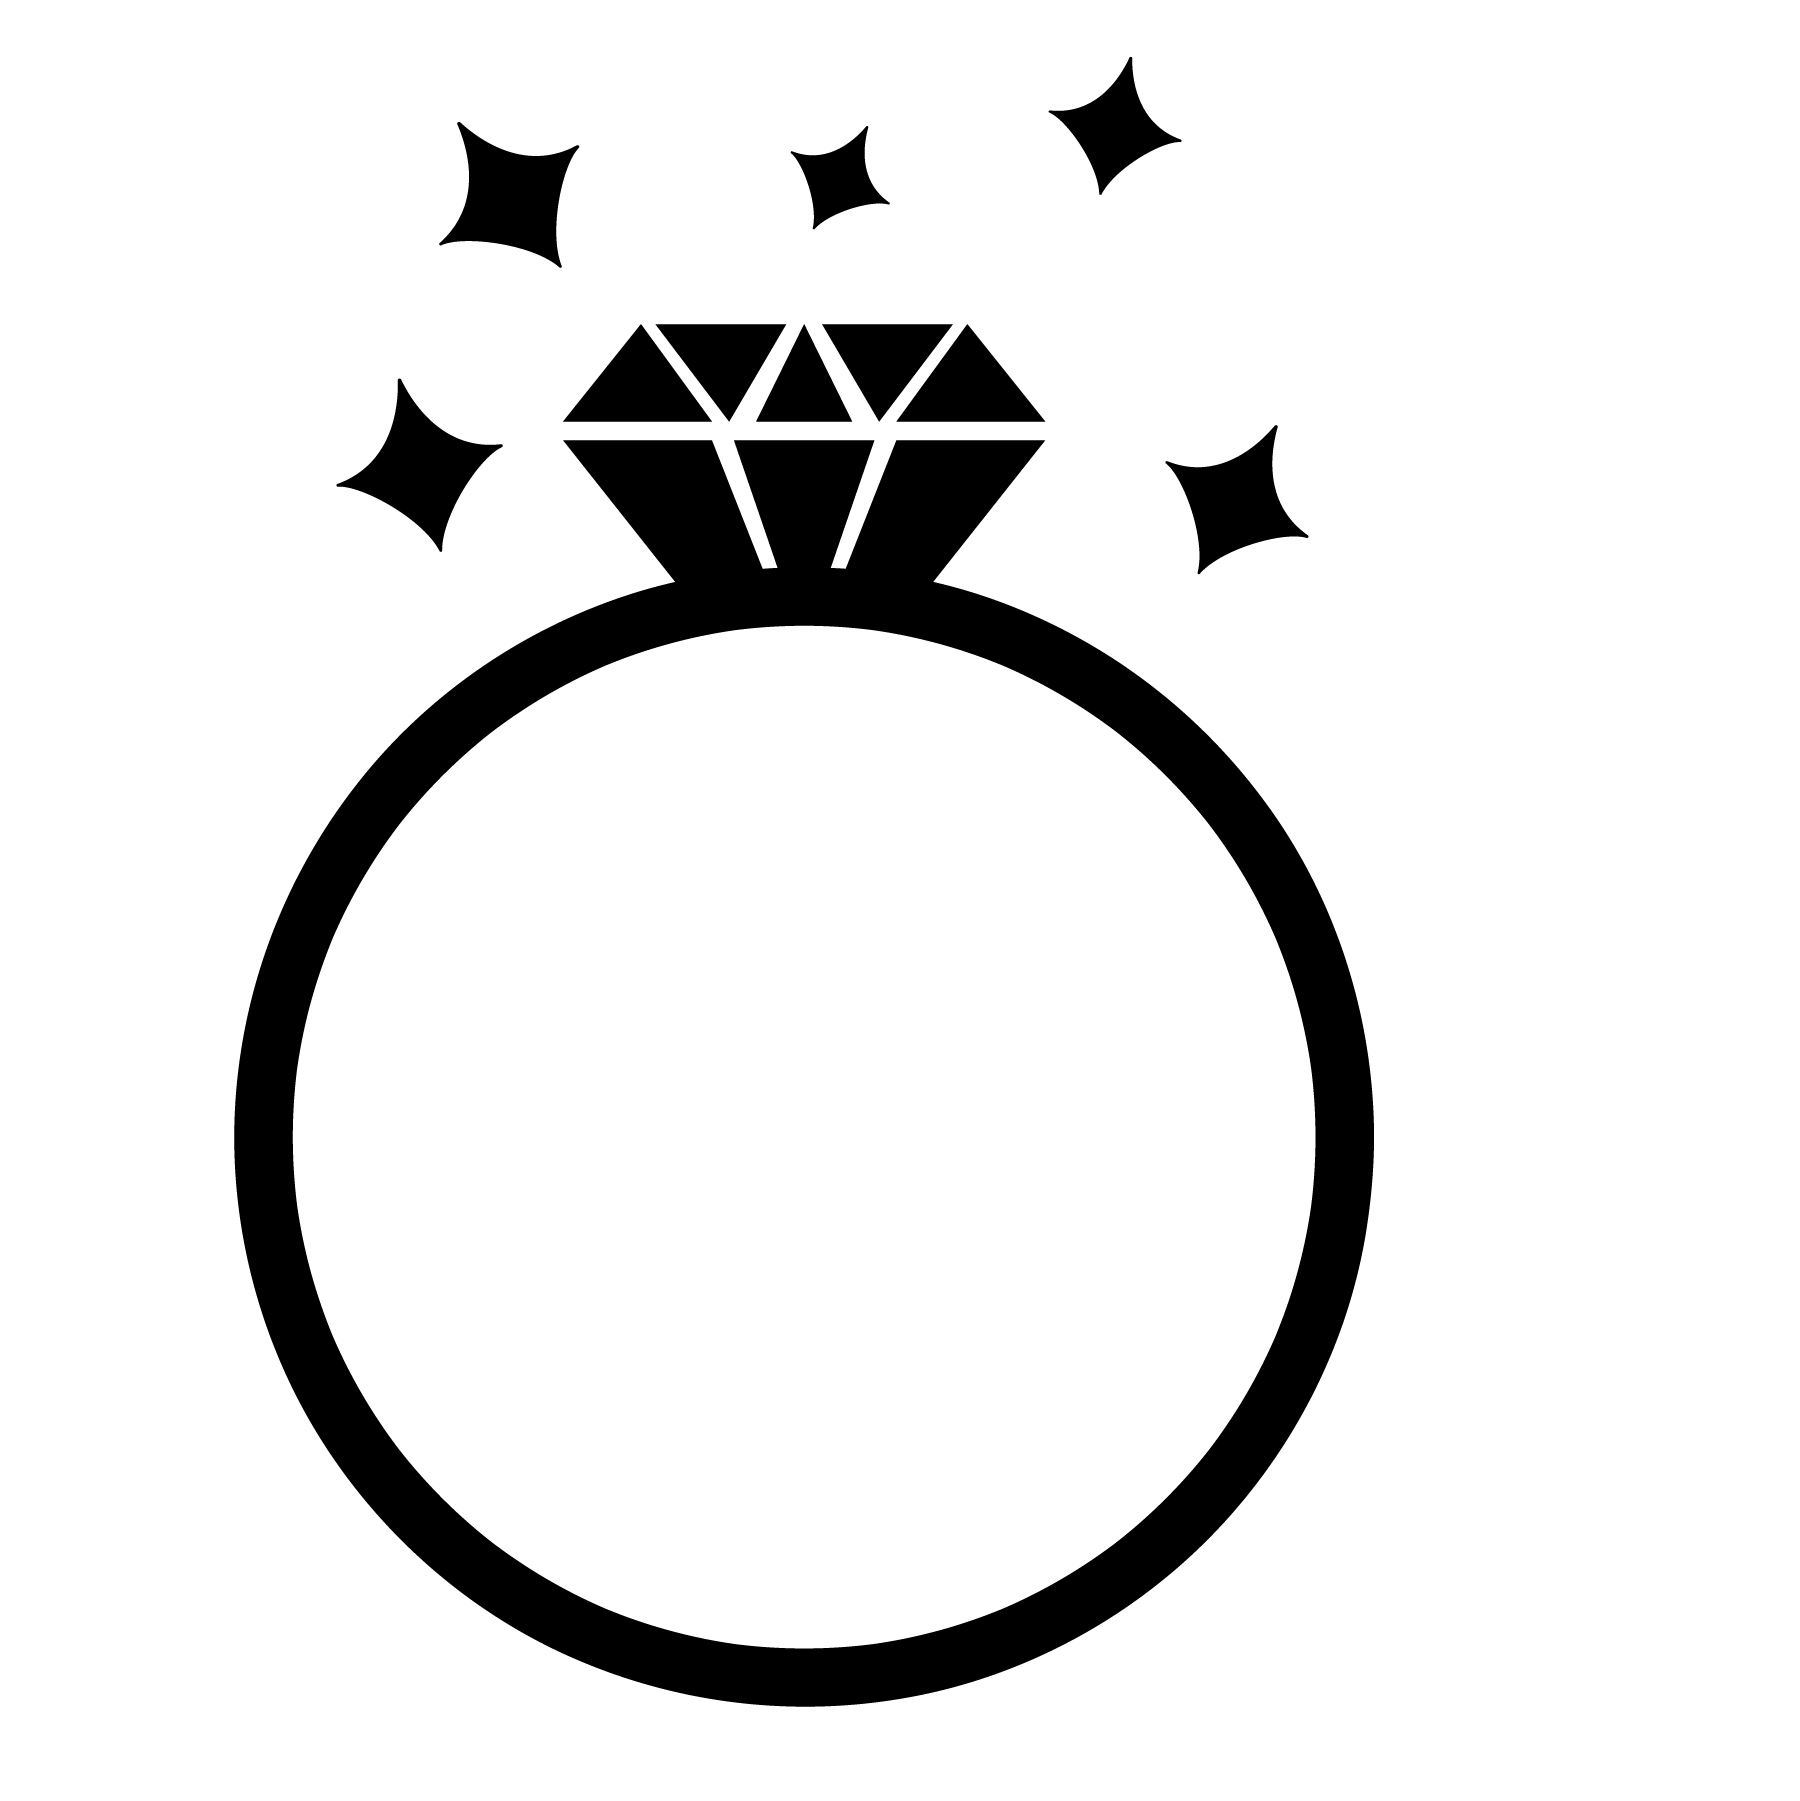 engagement ring - Download Free Vector Art, Stock Graphics & Images